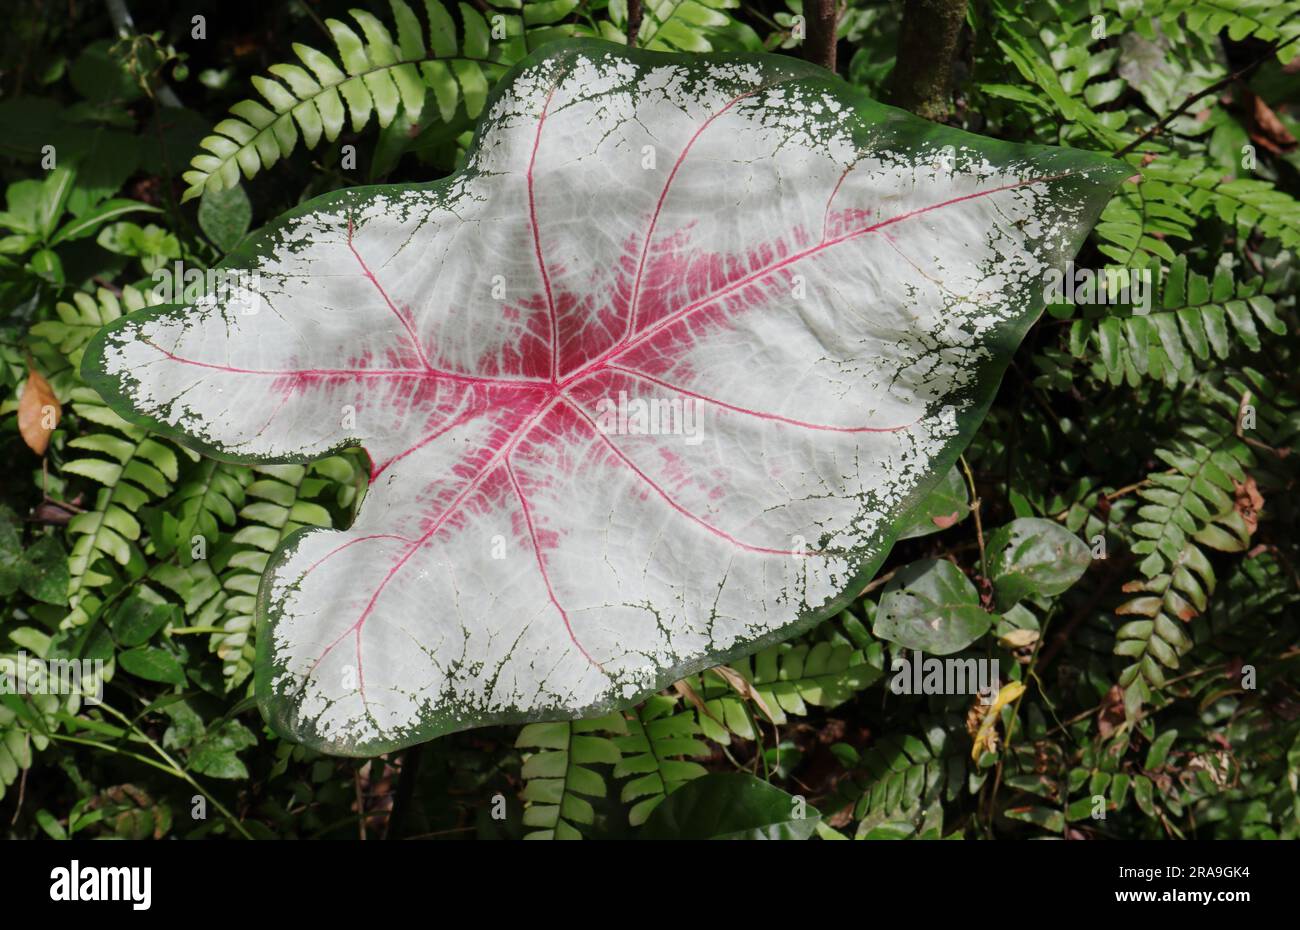 High angle view of a red and white variegated leaf of a Caladium Variety elevated up in a wild area Stock Photo